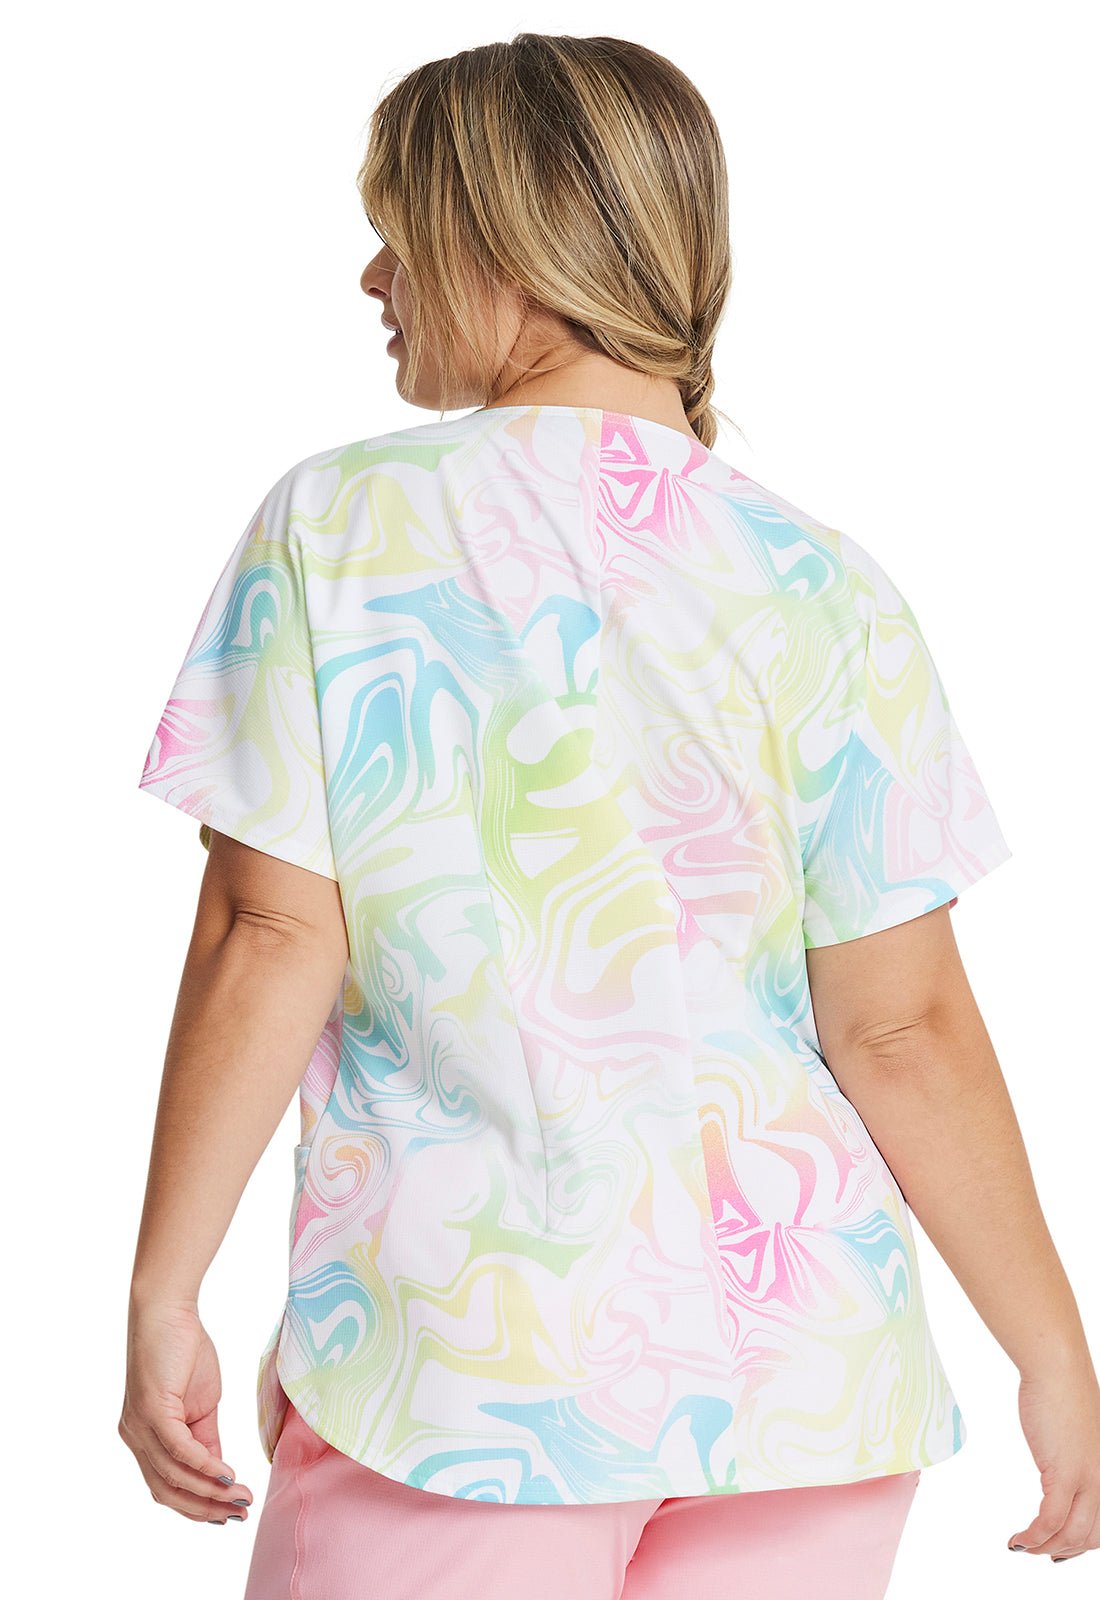 Gimme A Swirl HeartSoul Print Round Neck Scrub Top HS685 GESW - Scrubs Select